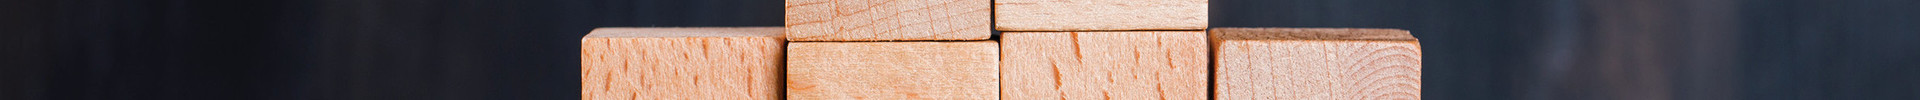 : Brick by Brick: Building Better Housing Policies